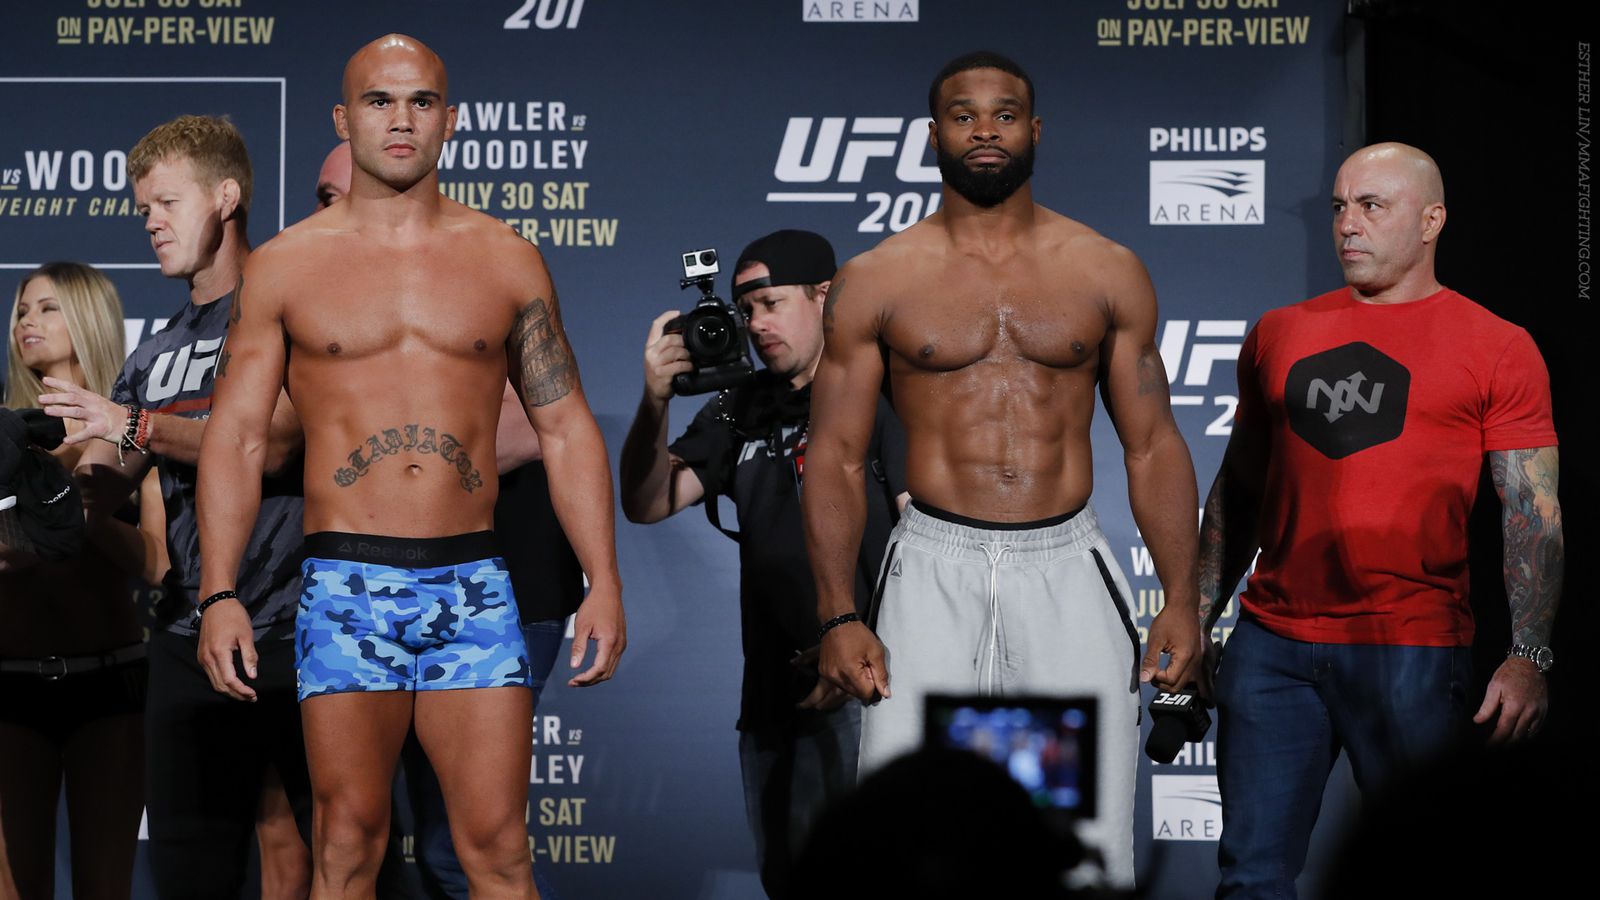 UFC 201 live stream: How to watch the Lawler vs. Woodley fight and undercard online ...1600 x 900